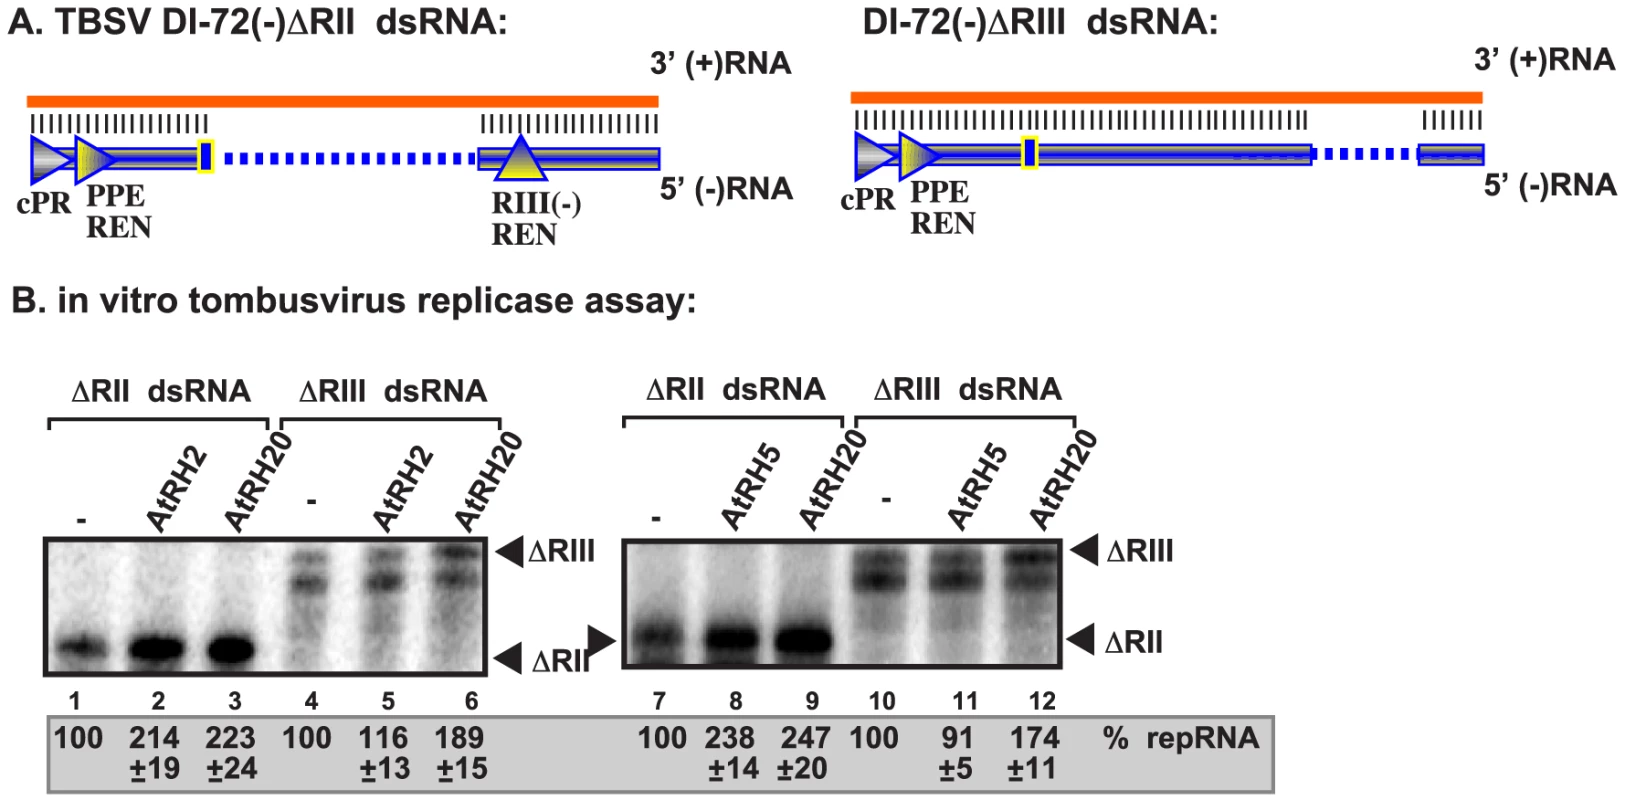 AtRH2 and AtRH5 promote plus-strand synthesis on partial dsRNA templates by the affinity-purified tombusvirus replicase.